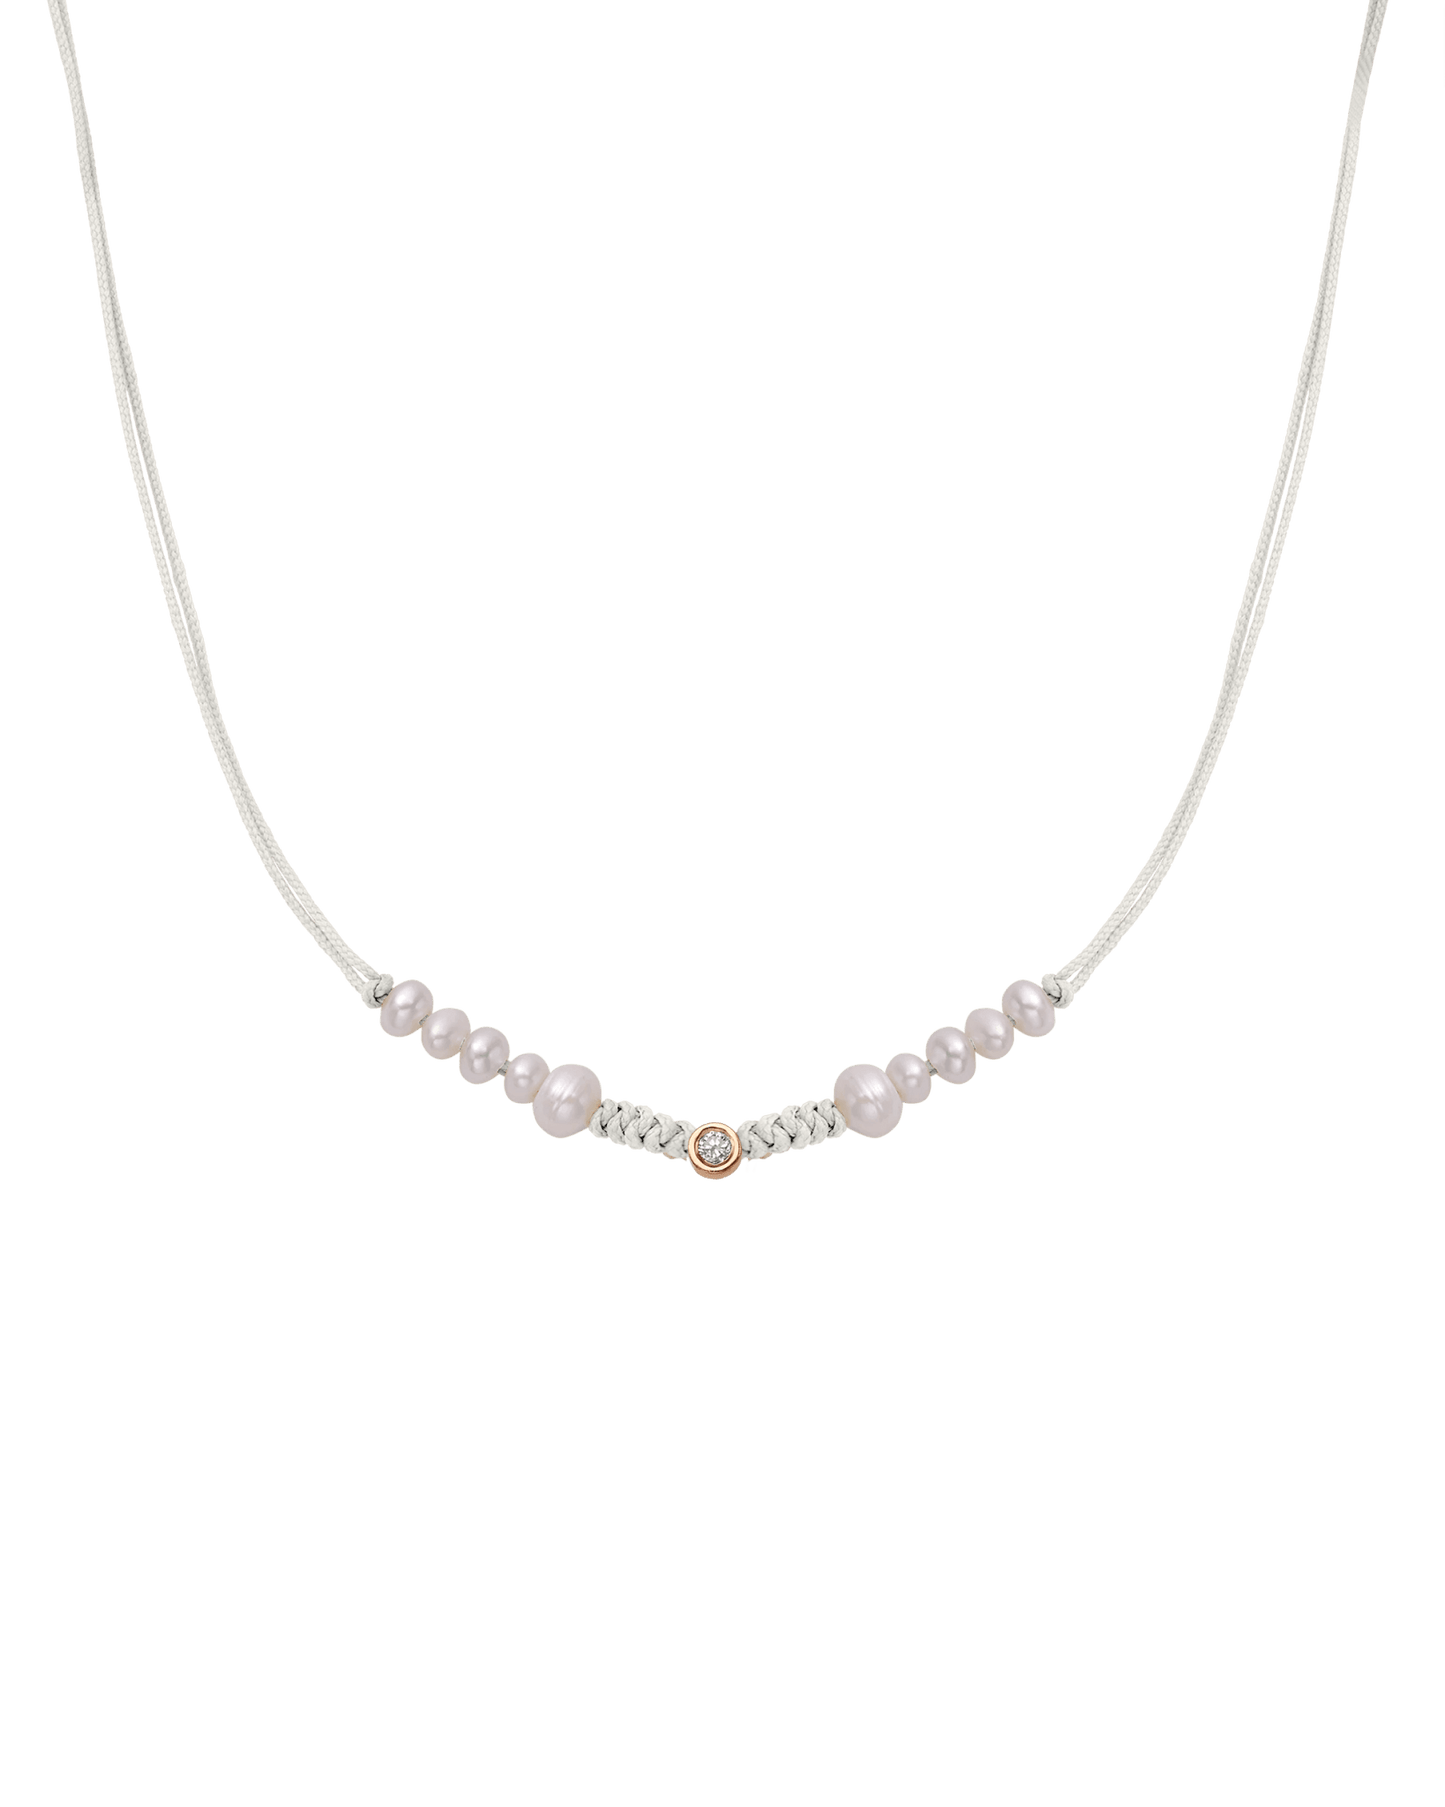 Ten Natural Pearl String of Love Necklace - 14K Rose Gold Necklaces 14K Solid Gold Pearl Medium: 0.04ct 